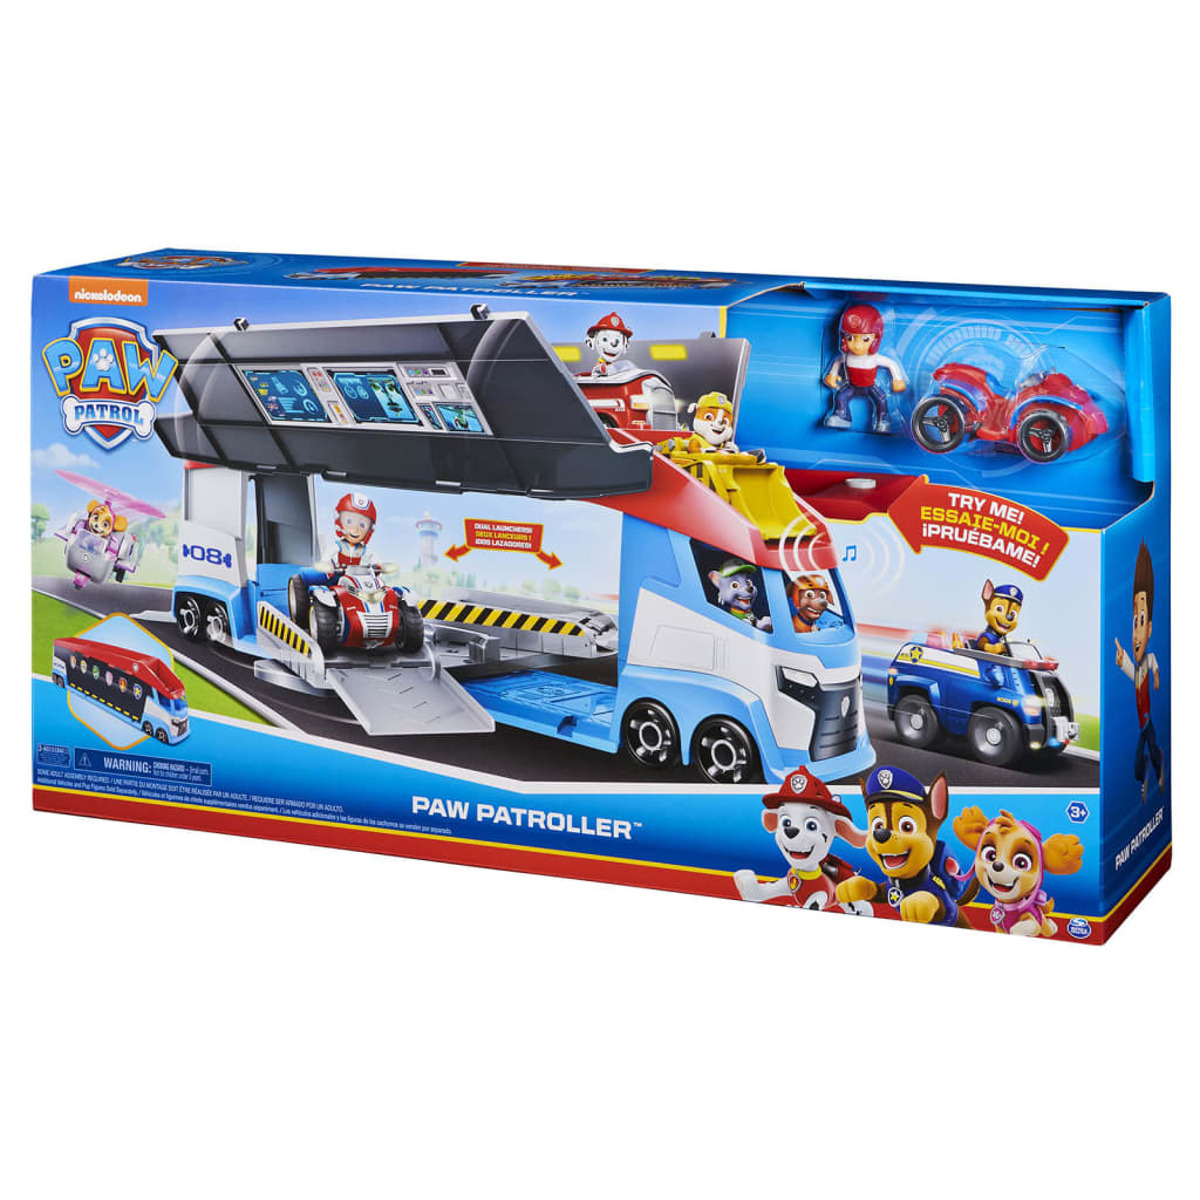 PATROLLER SPIN MASTER 33143 PAW Spielset PAW 2.0